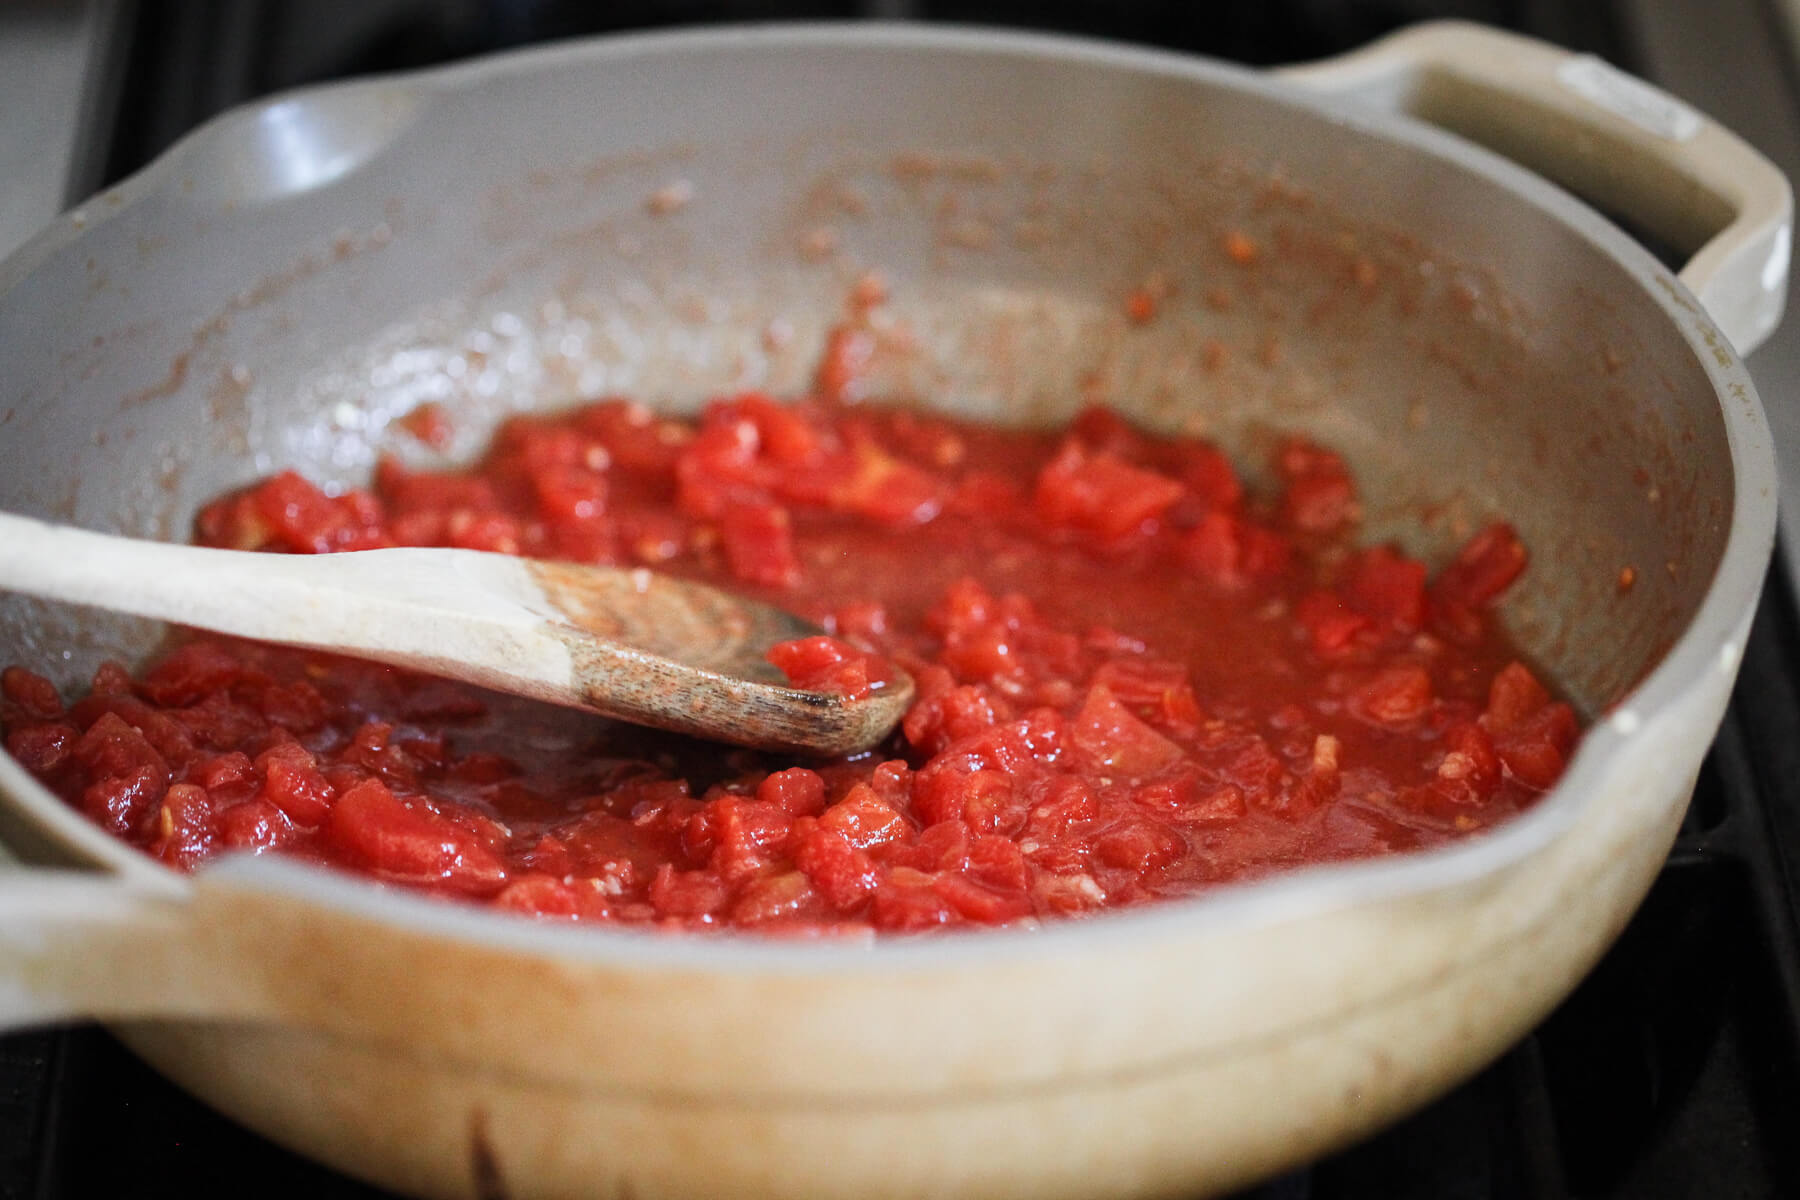 Petite diced tomatoes simmer with herbs and garlic.